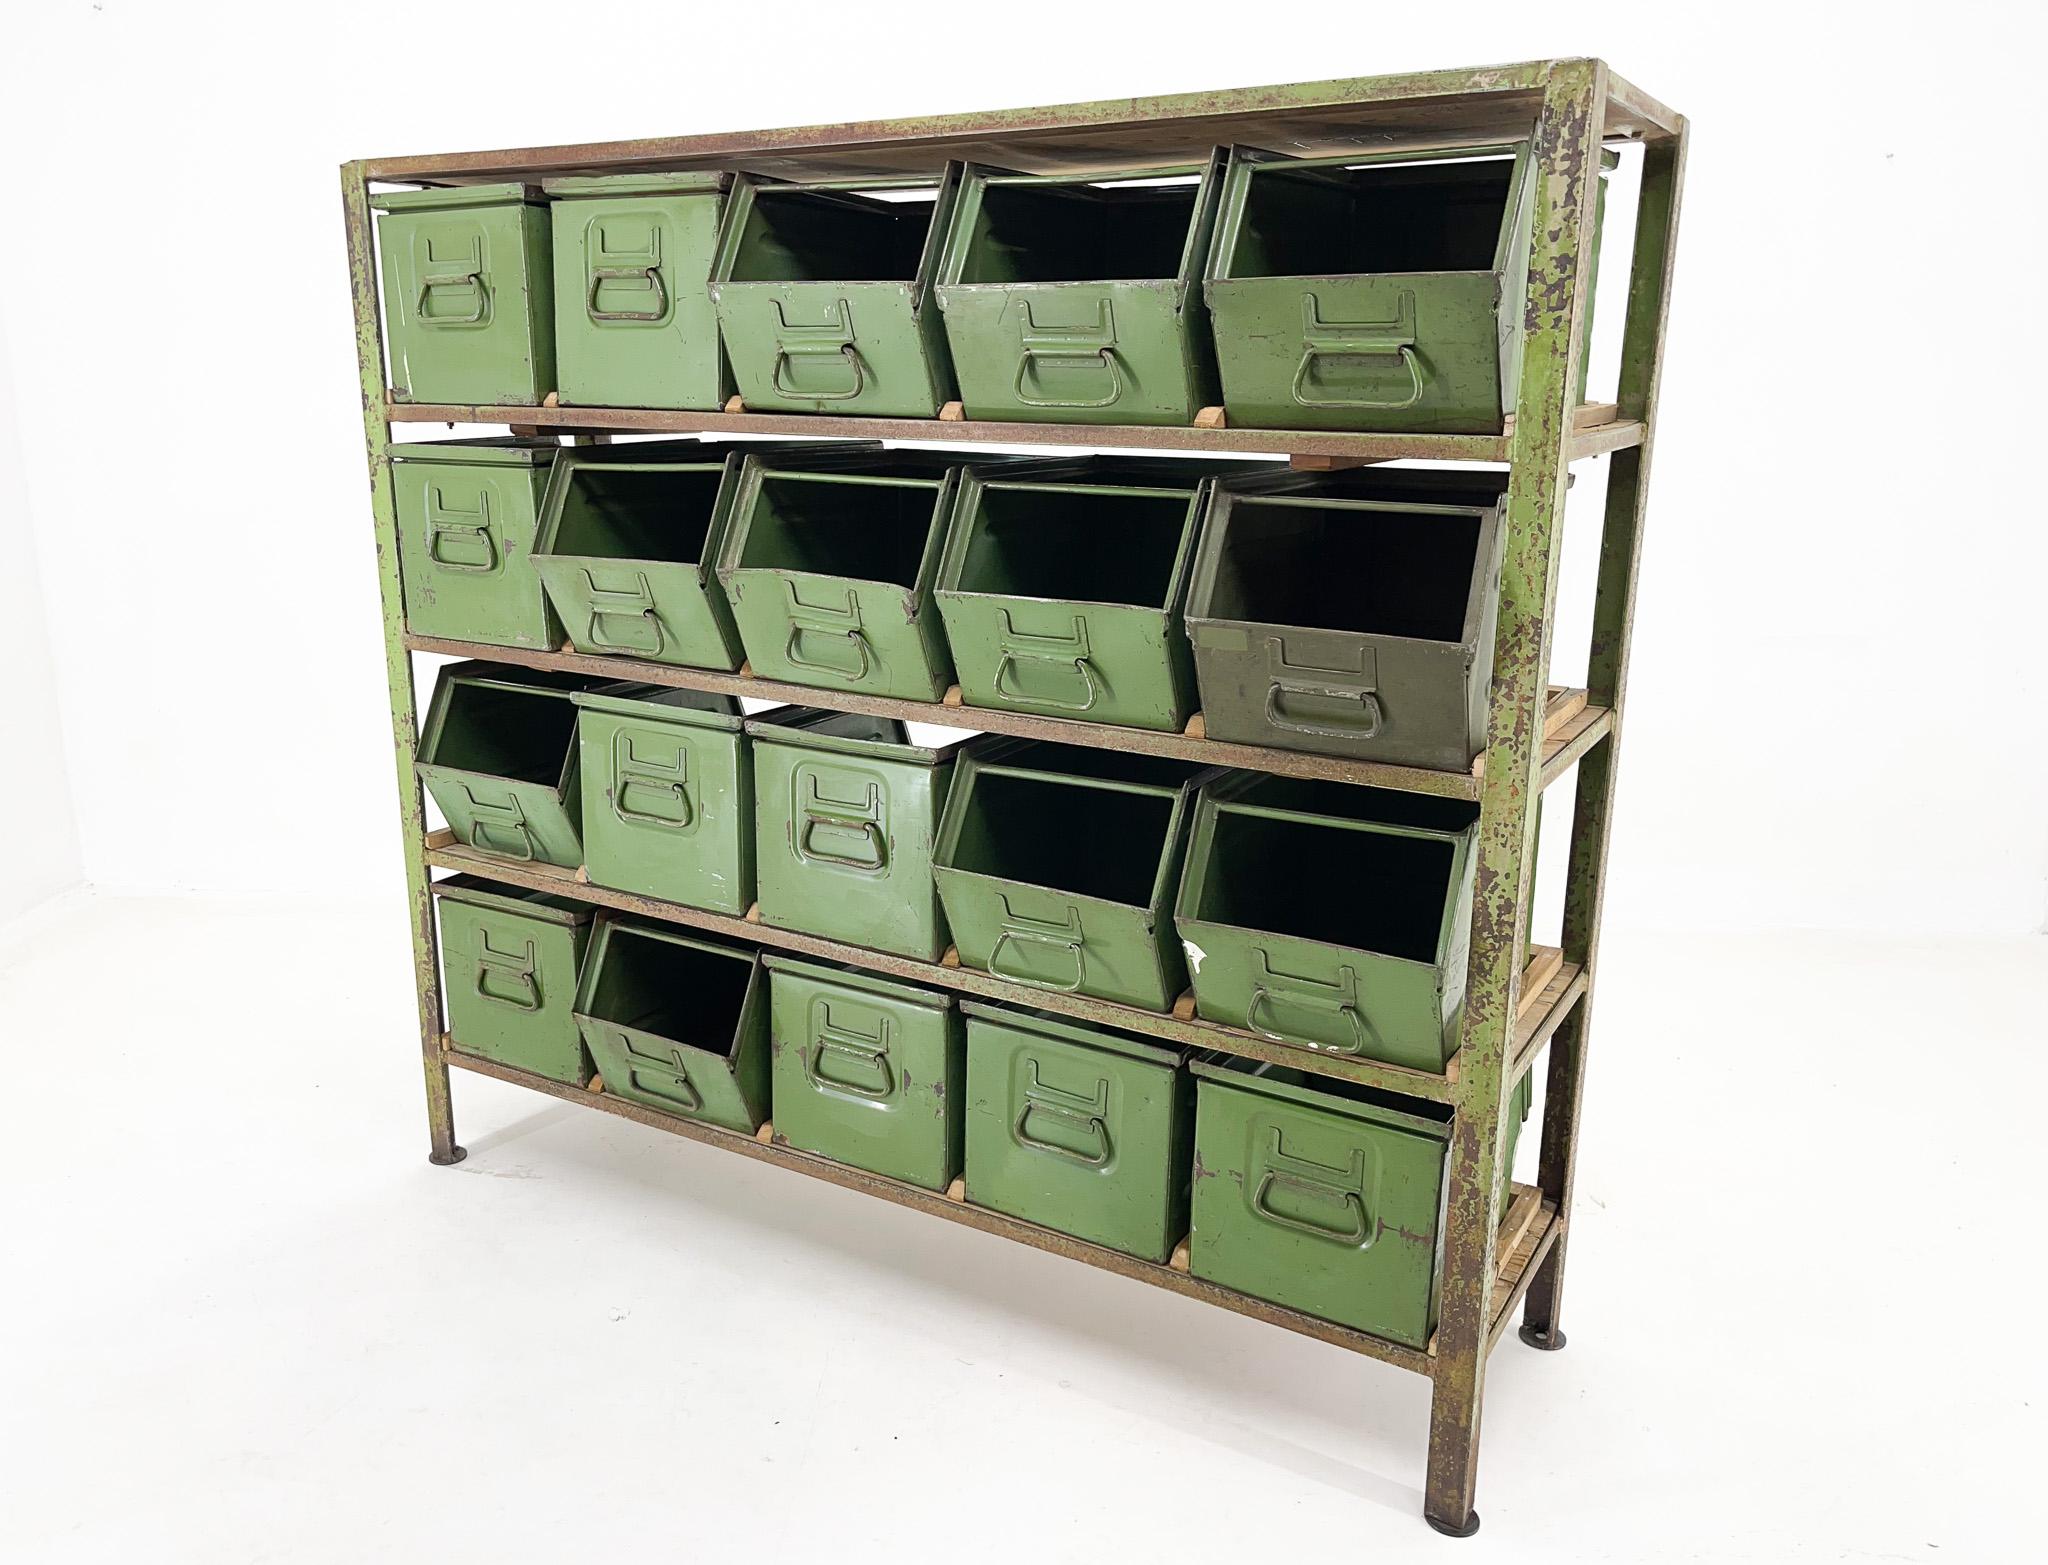 Czech Vintage Industrial Cabinet, 20 Iron Drawers, Wooden Top, 1950s